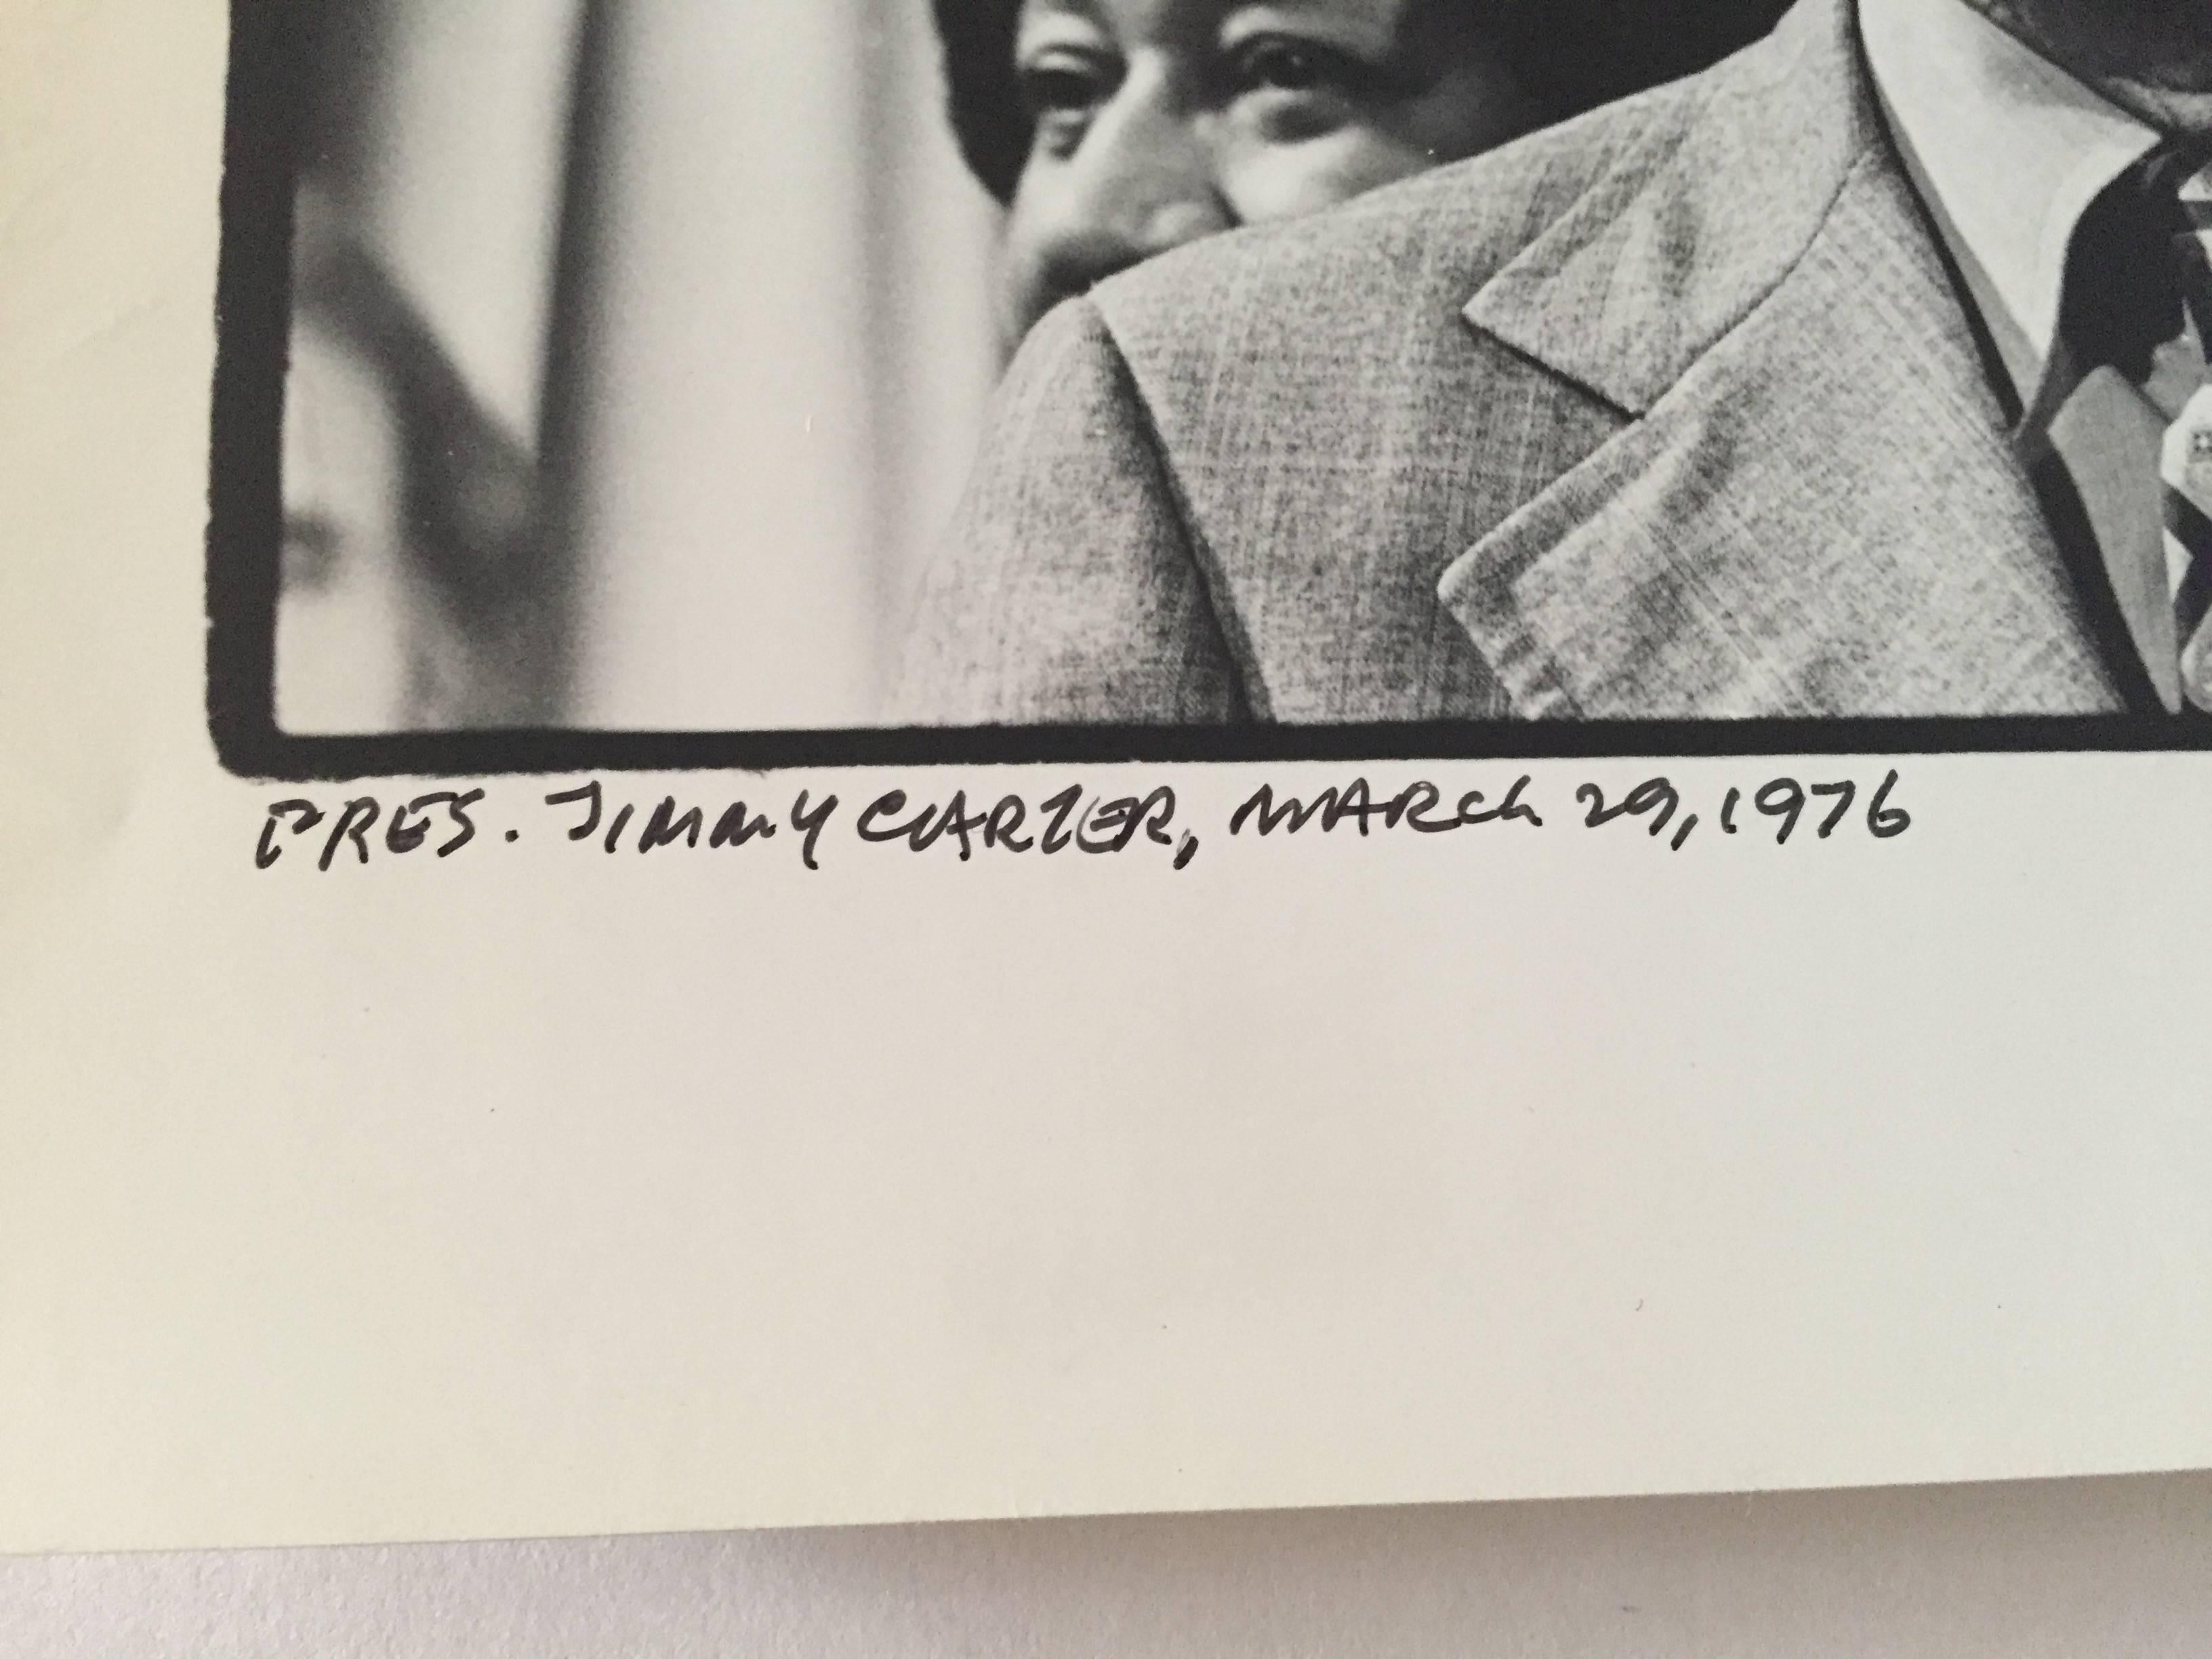 Pres. Jimmy Carter, March 29, 1976 - Photograph by Fred McDarrah